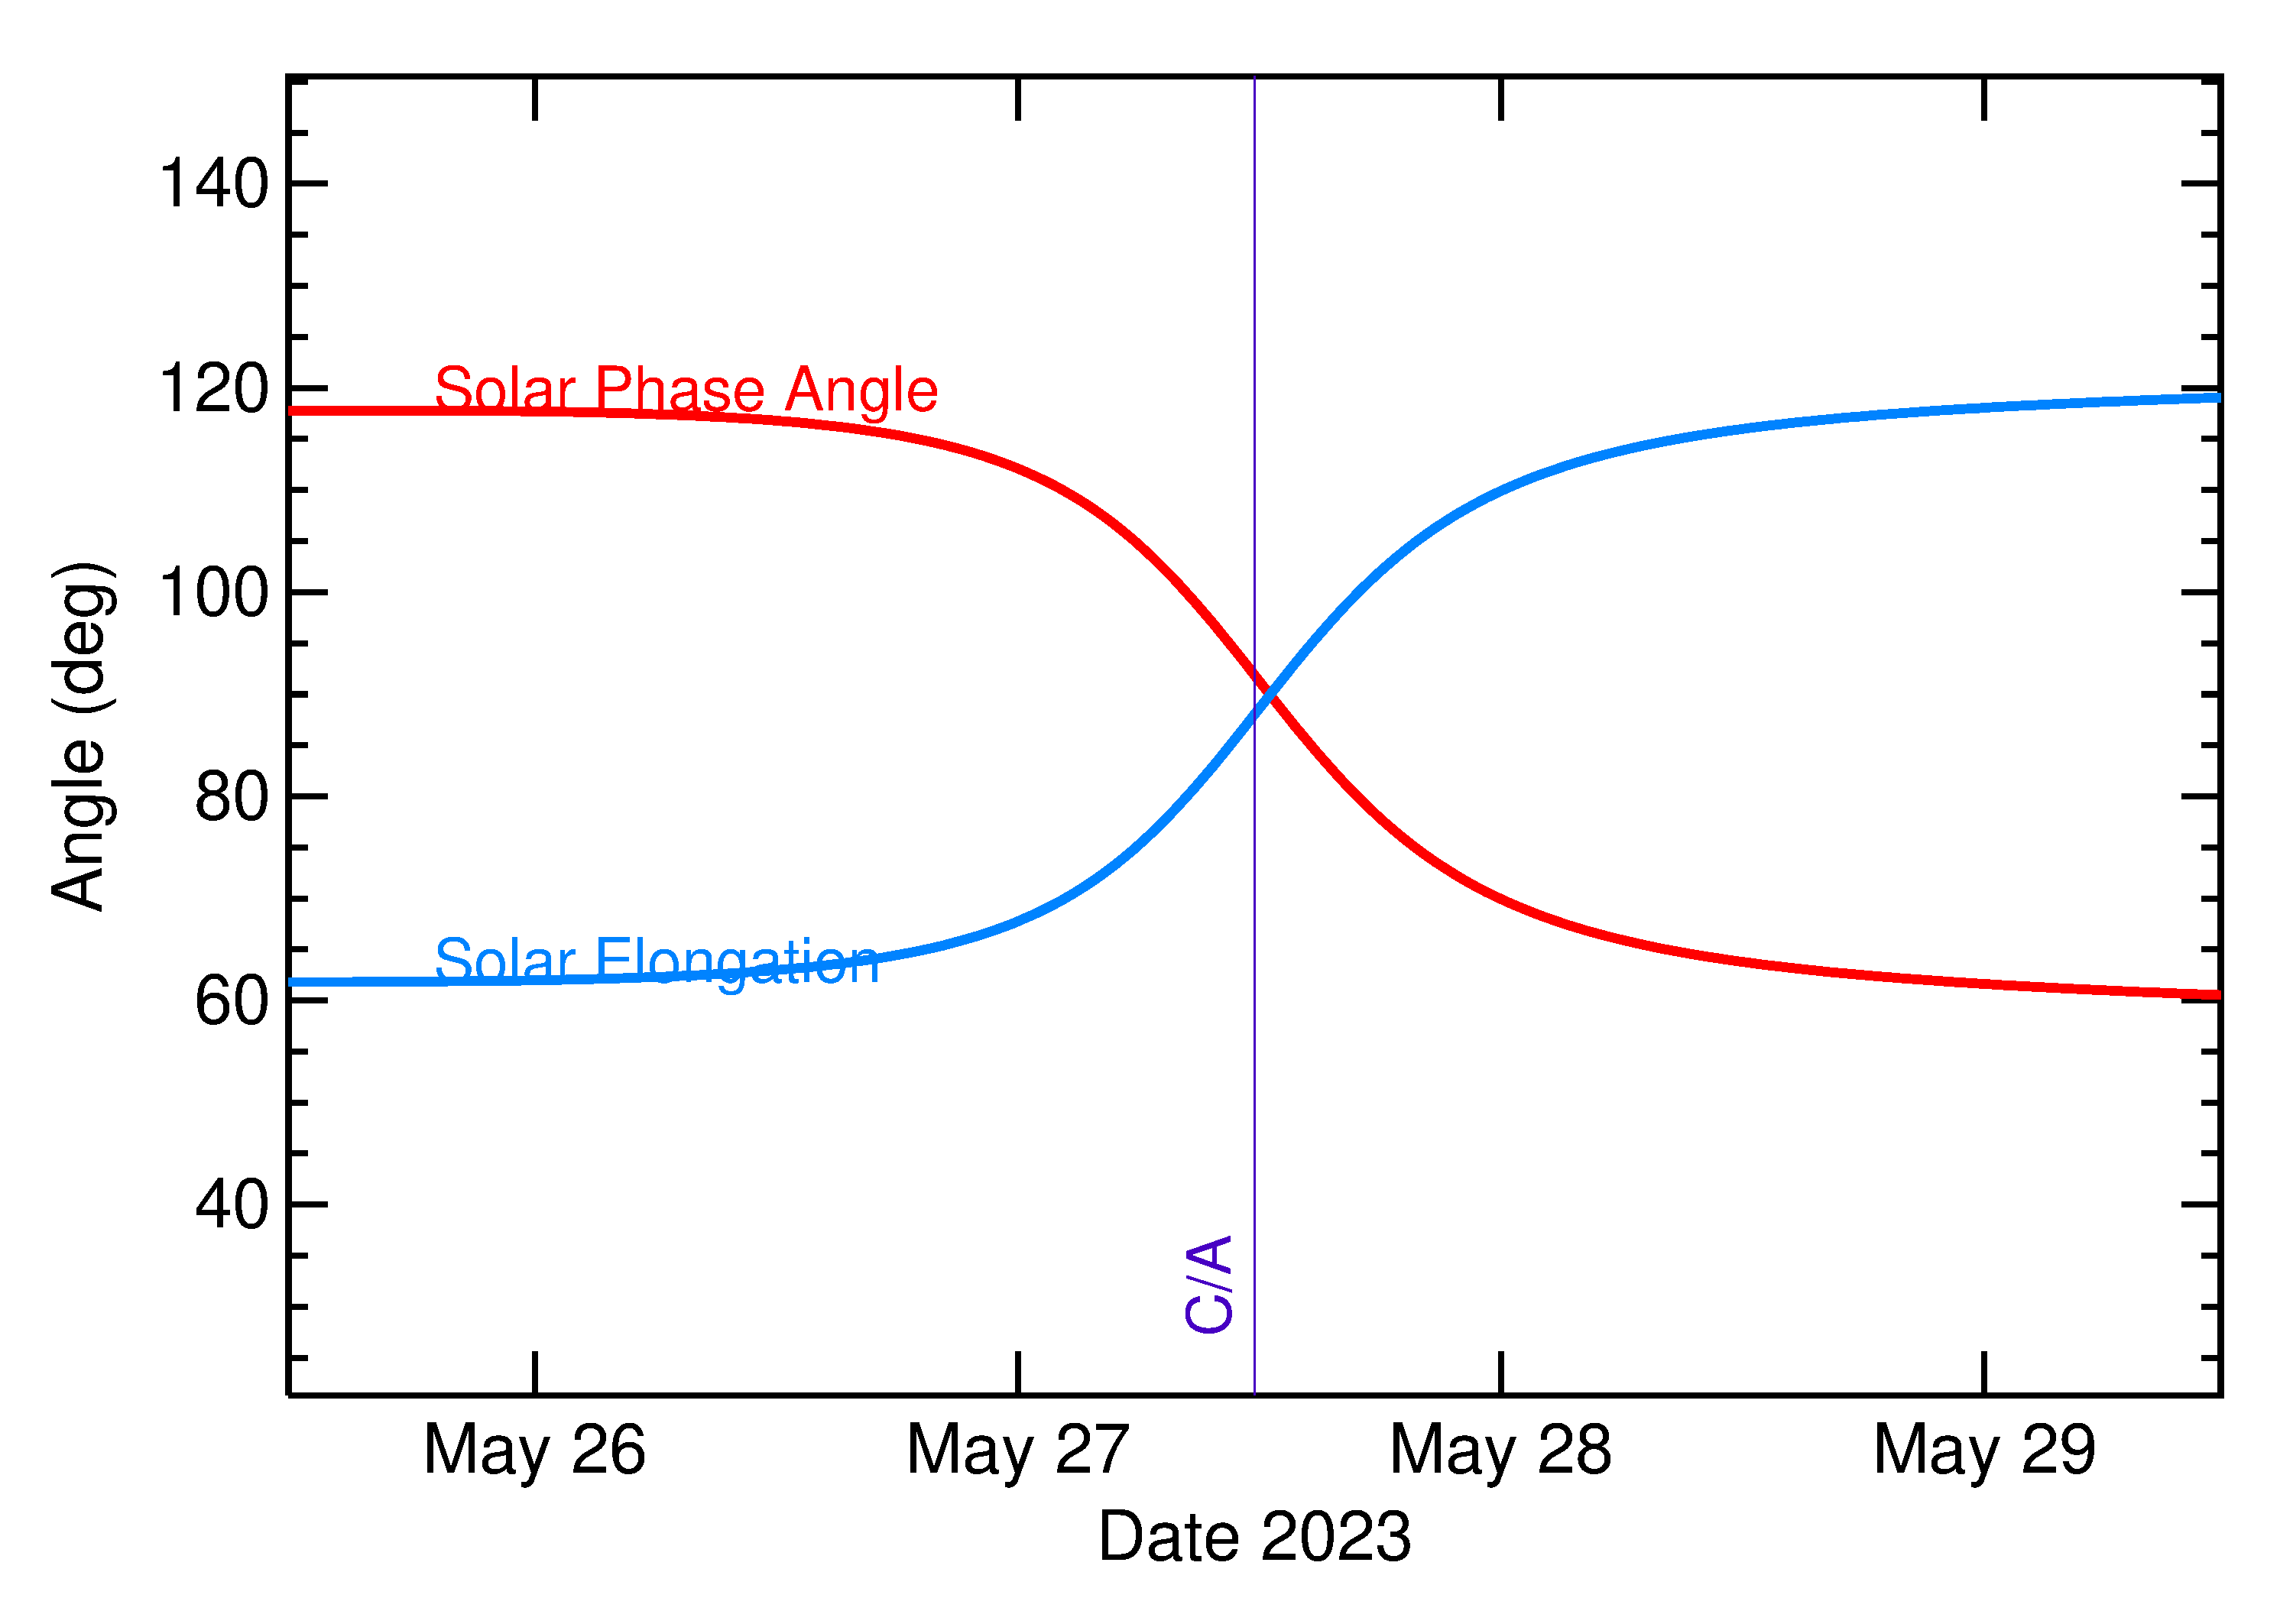 Solar Elongation and Solar Phase Angle of 2023 KU4 in the days around closest approach